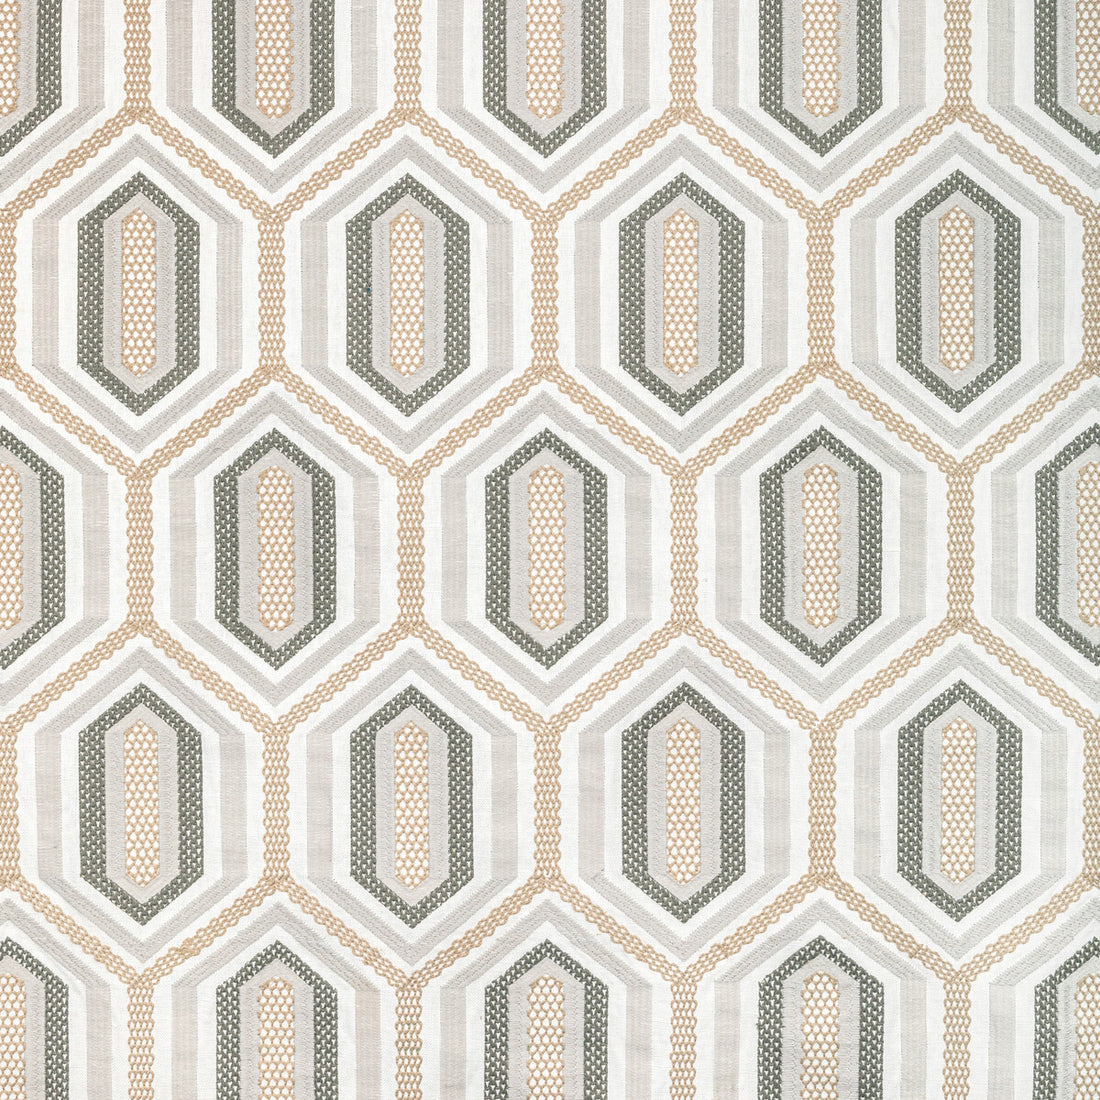 Kaleidoscope Emb fabric in natural color - pattern 36368.1611.0 - by Kravet Couture in the Corey Damen Jenkins Trad Nouveau collection